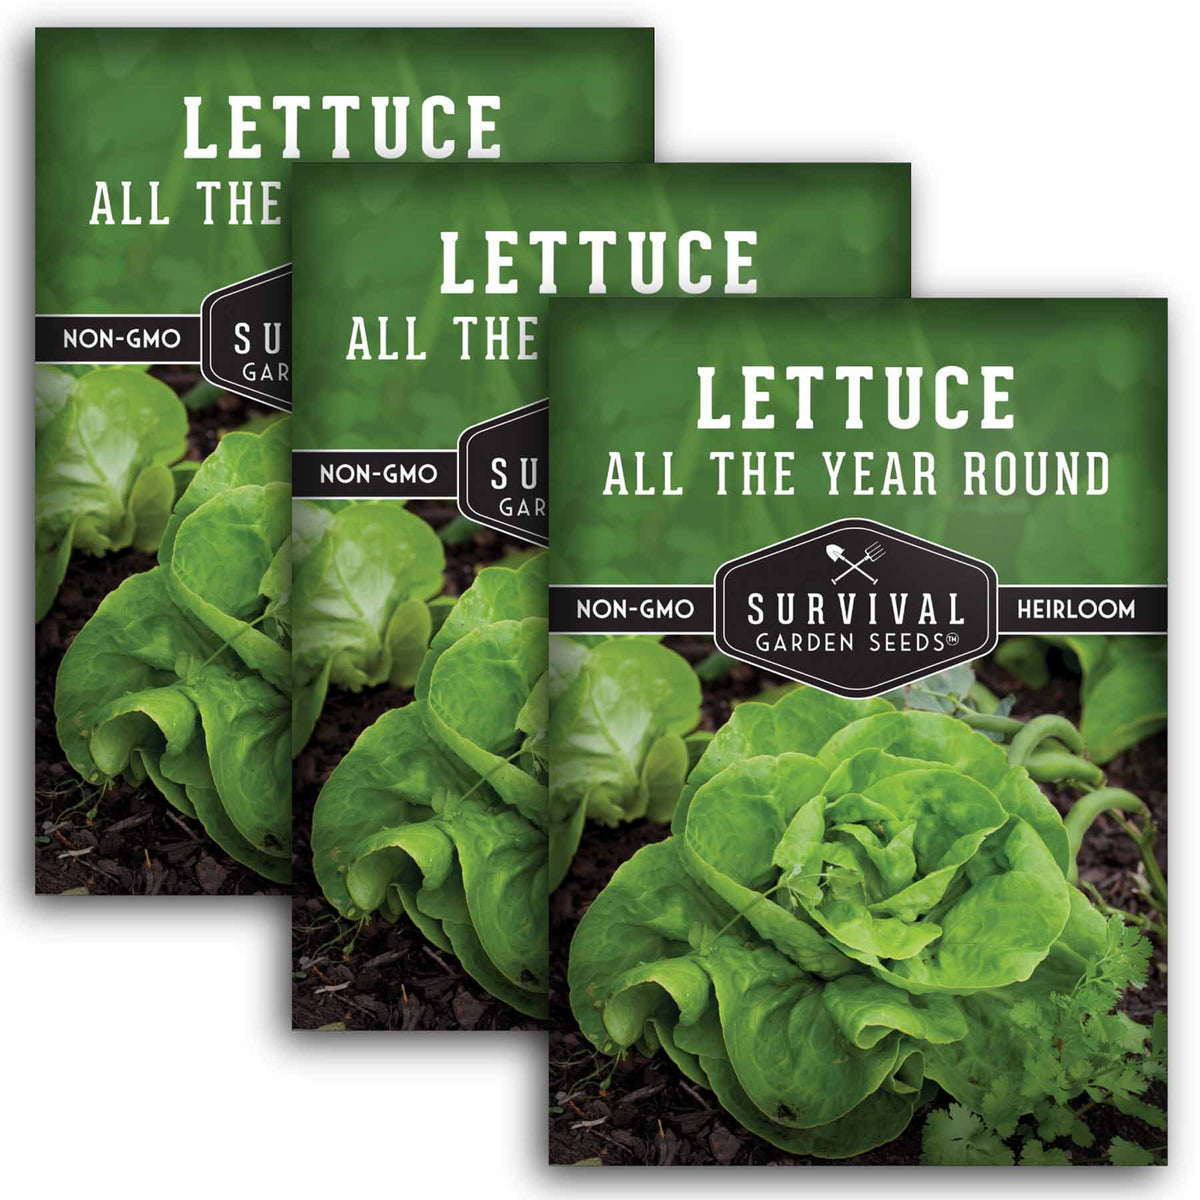 3 packets of All the Year Round Lettuce seeds